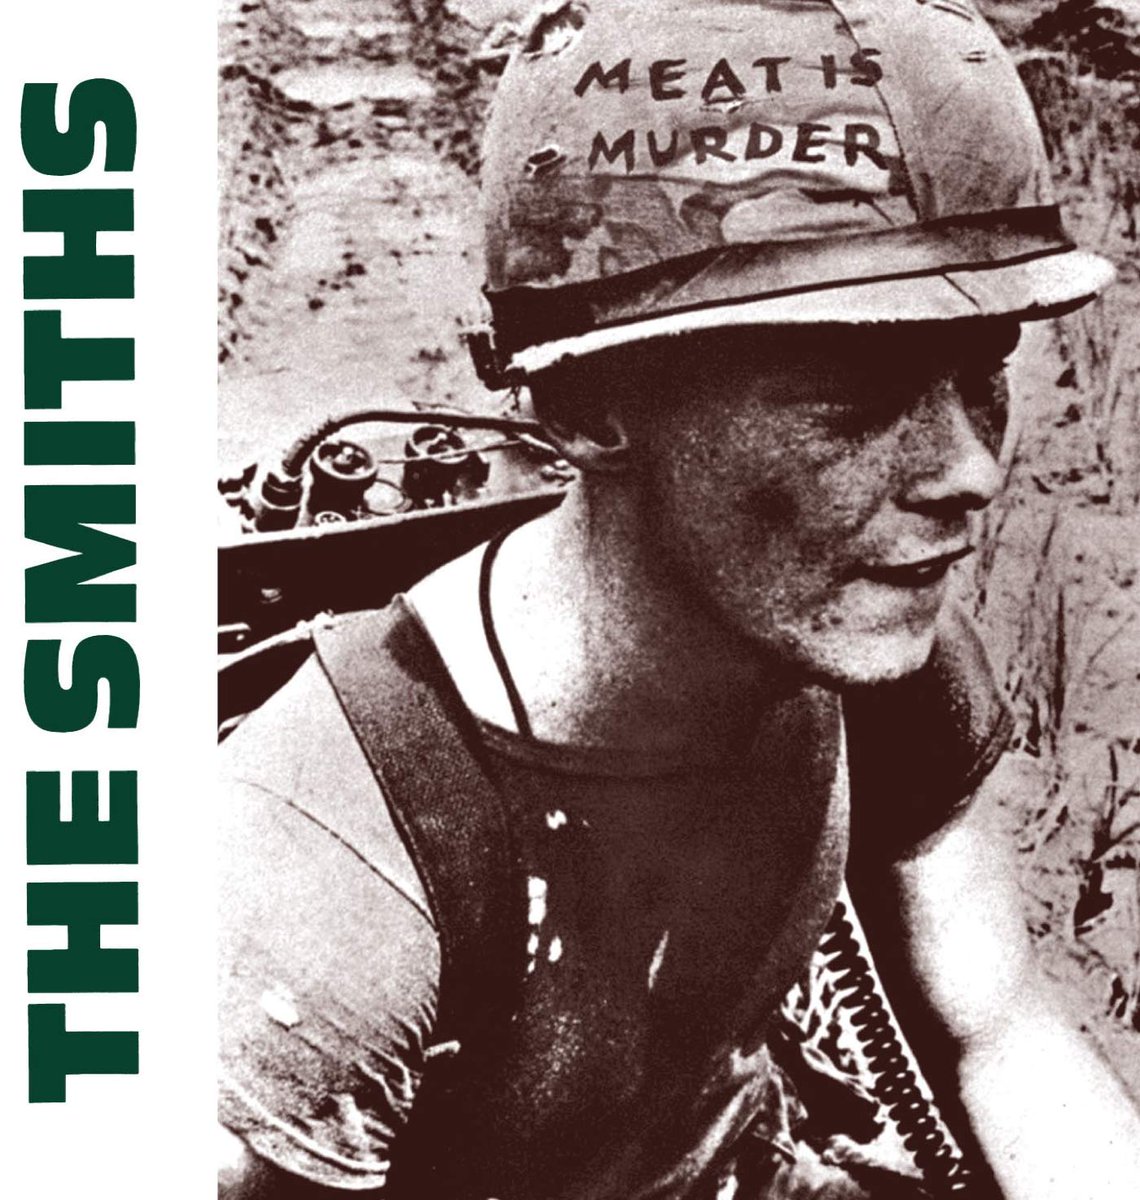 39 years ago today
Meat Is Murder is the second studio album by English post punk band the Smiths, released on this day in 1985. 

#punkrock #postpunk #thesmiths #history #postpunkhistory #otd